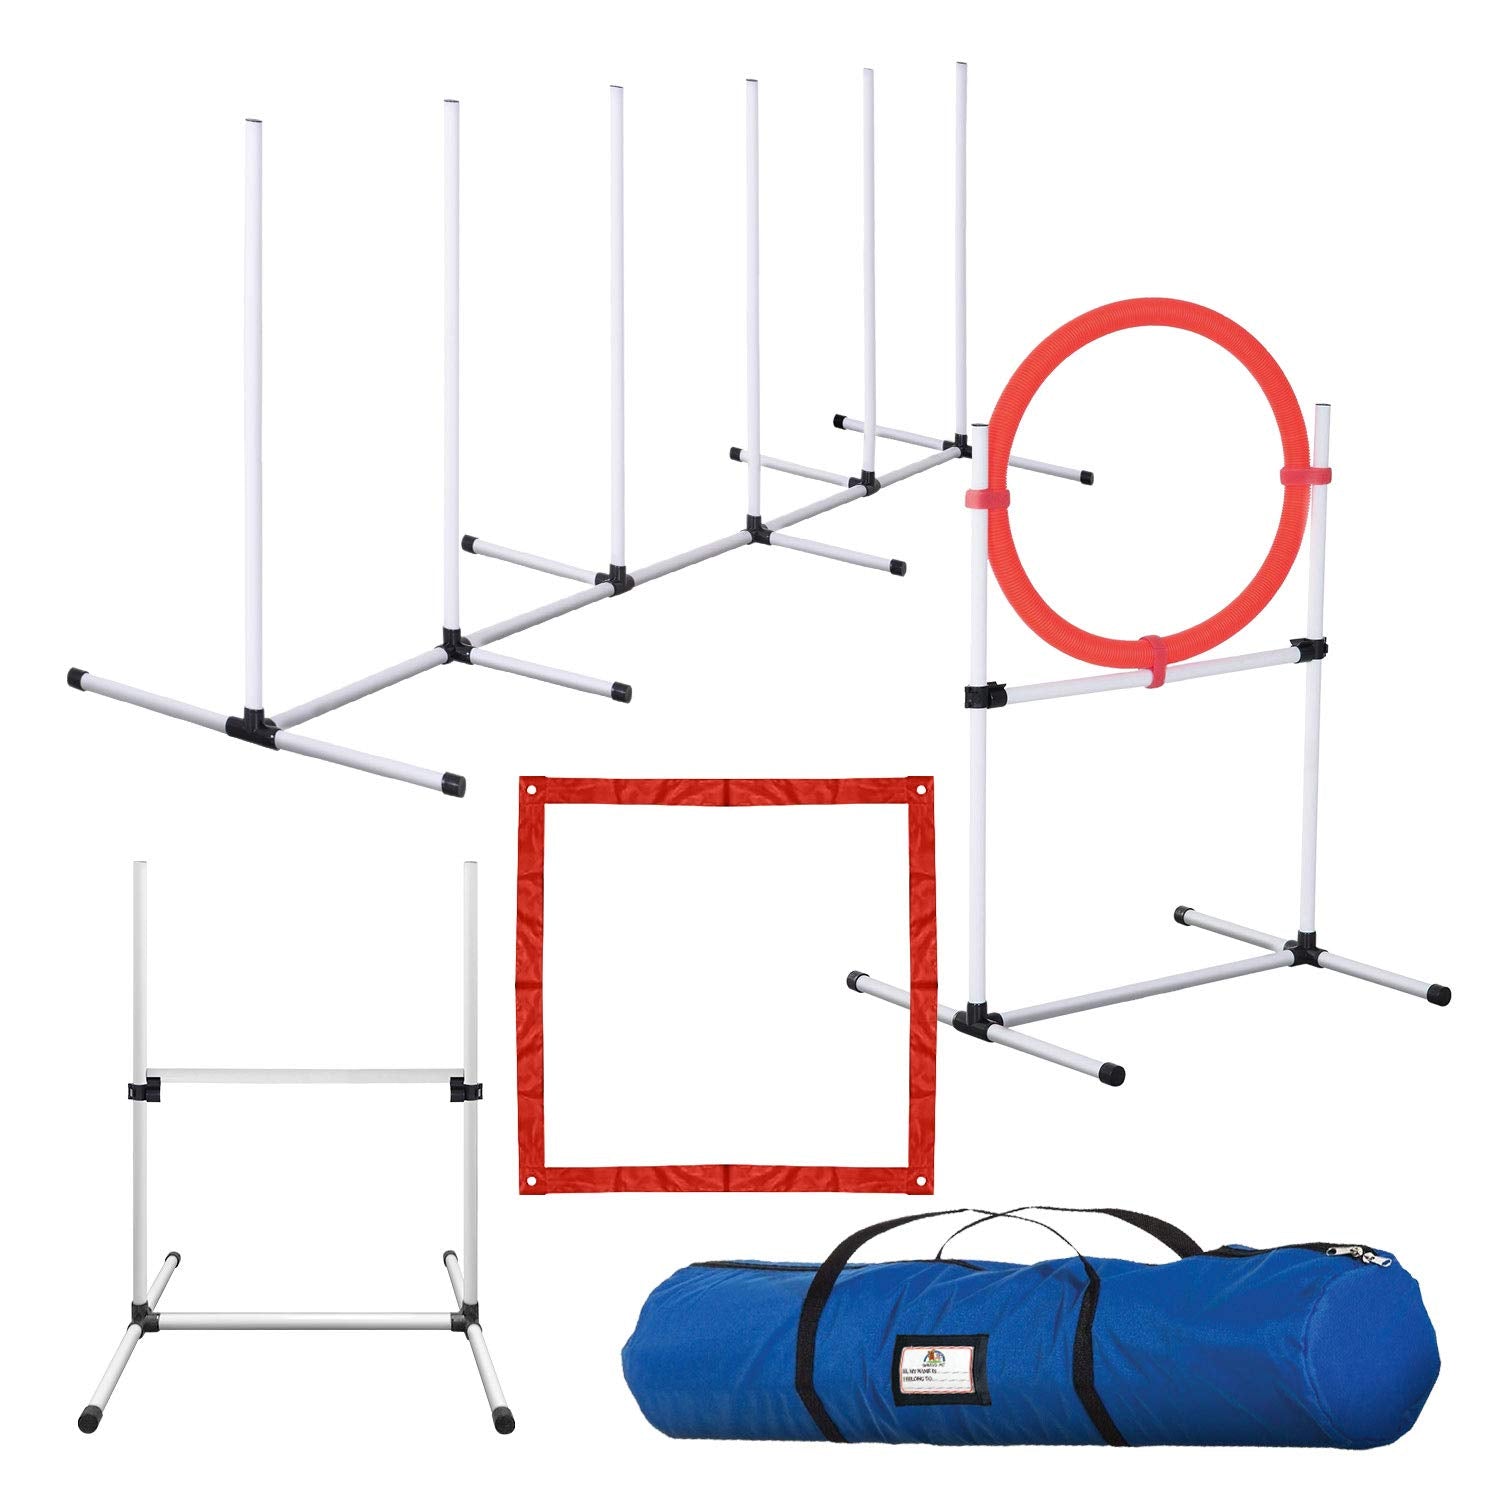 CHEERING PET, Premium Dog Agility Equipment Set, 5 Pieces of Dog Training Fun, Tunnel, Dog Jump, Hoop, Weave Poles and Easy Carry Case Indoor or Outdoor Dog Agility Training  - Like New